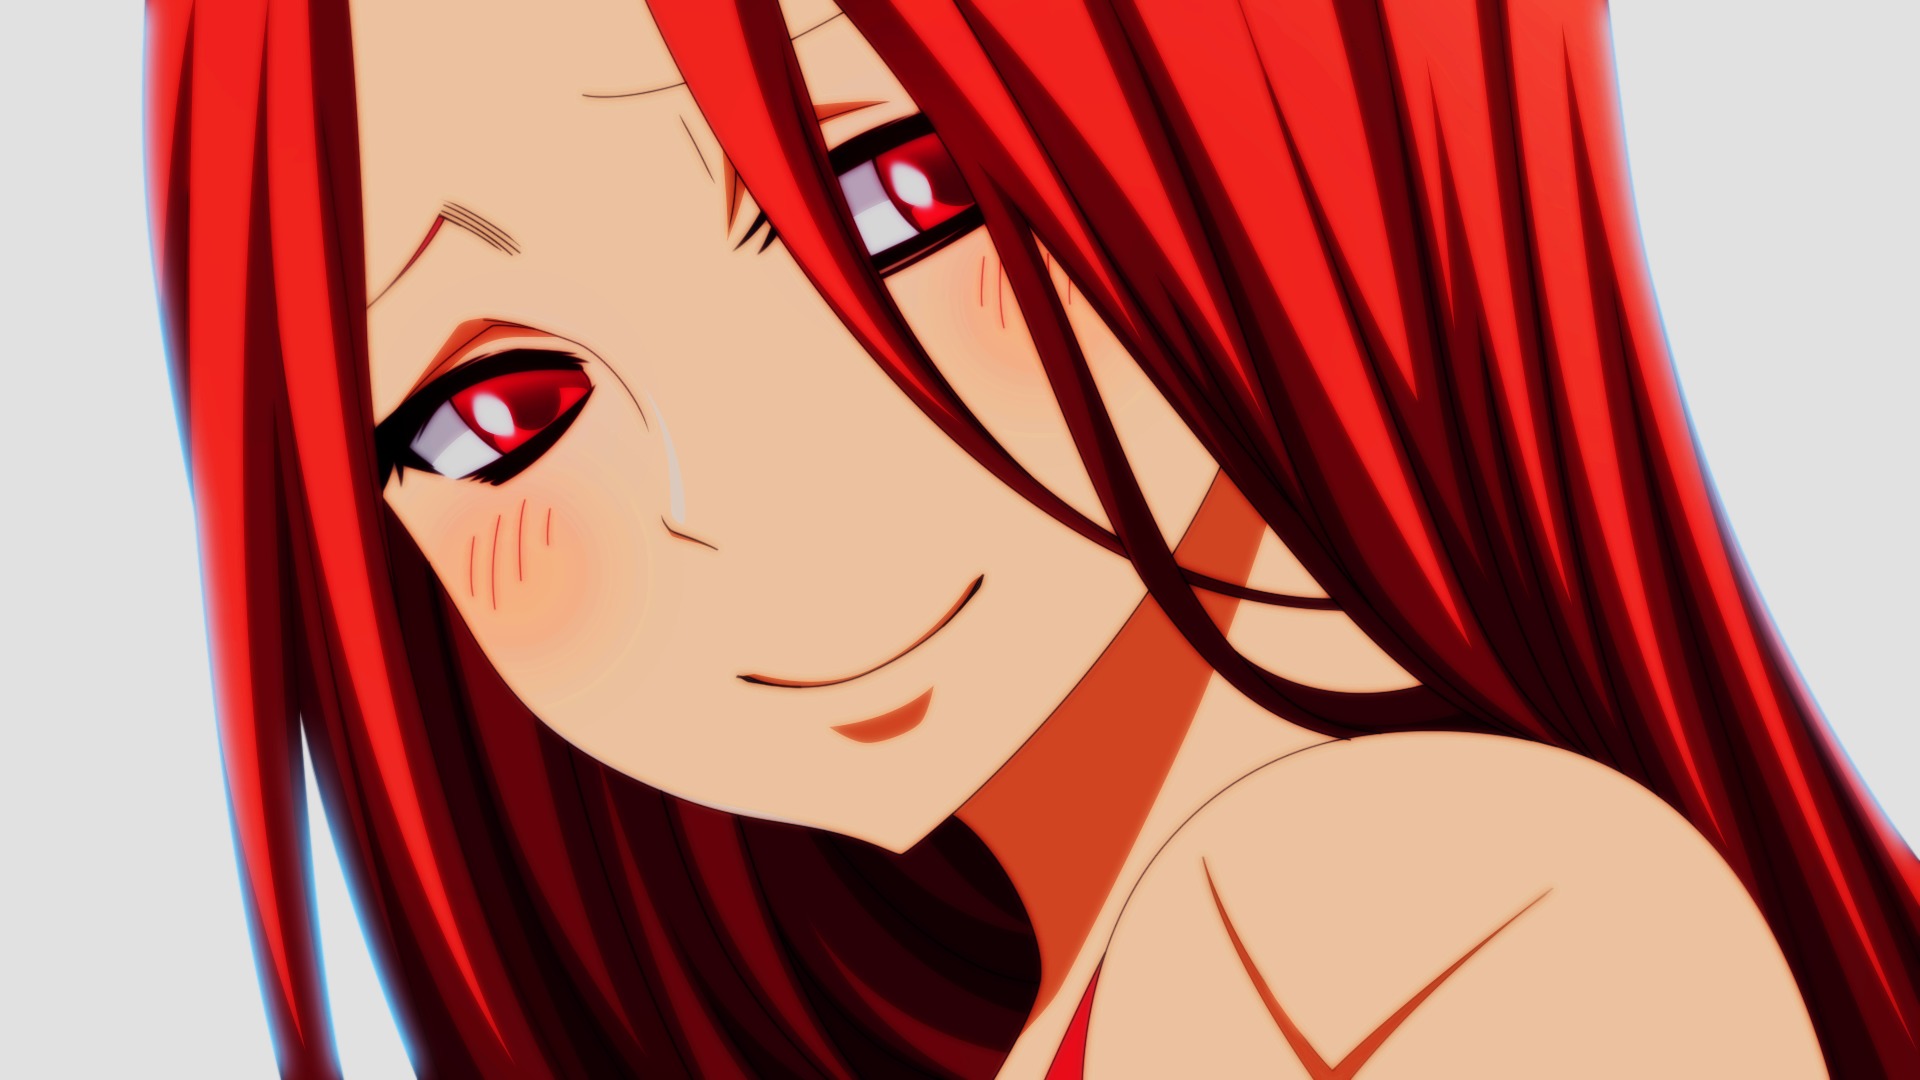 Download wallpaper a sad look white background anime red hair fairy tail flare corona a gentle smile section other in resolution x